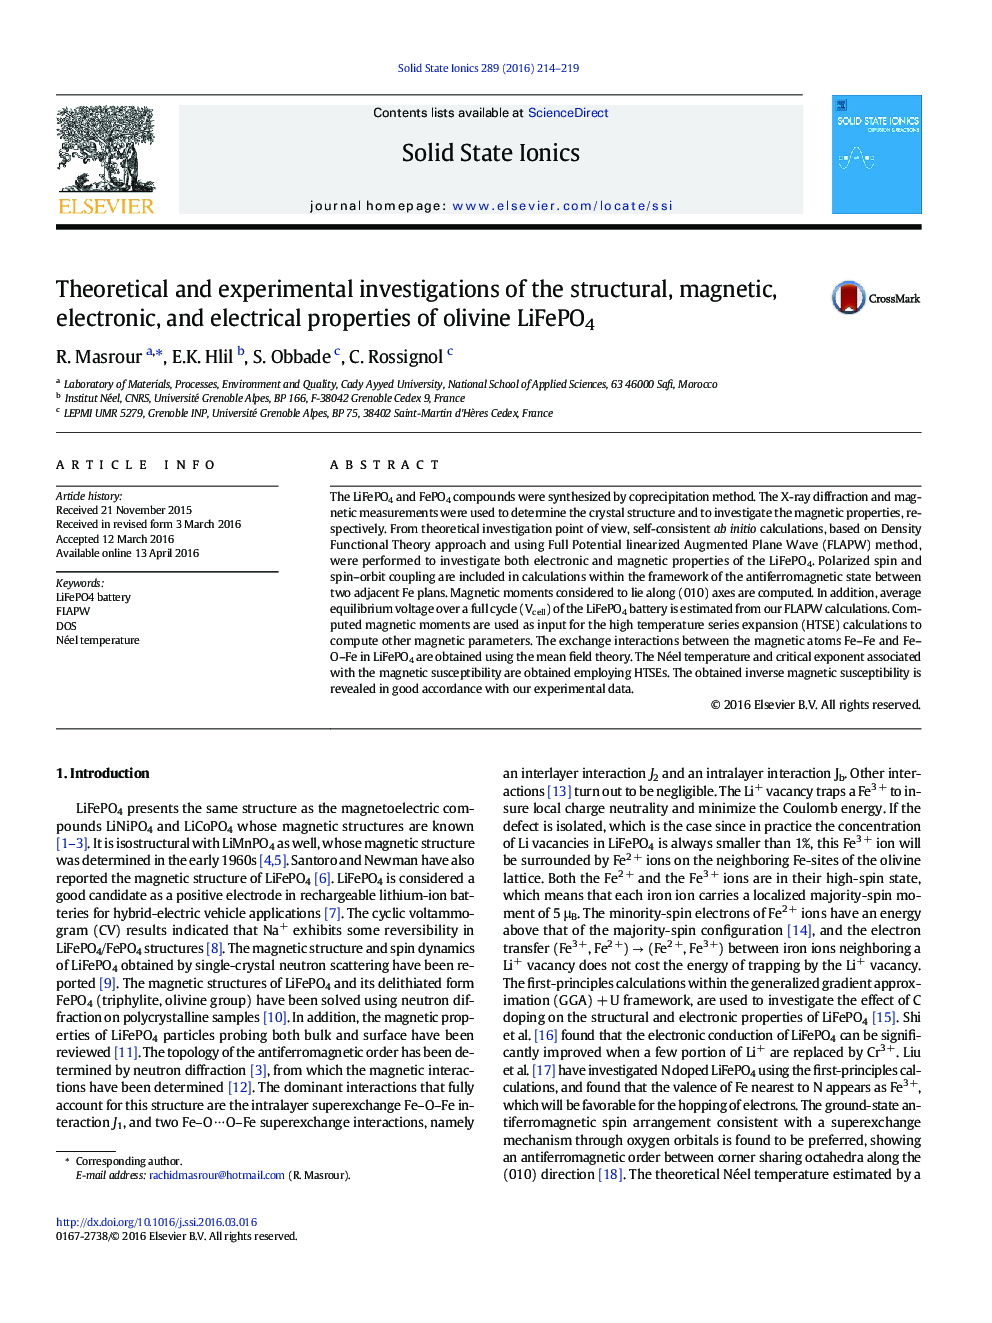 Theoretical and experimental investigations of the structural, magnetic, electronic, and electrical properties of olivine LiFePO4